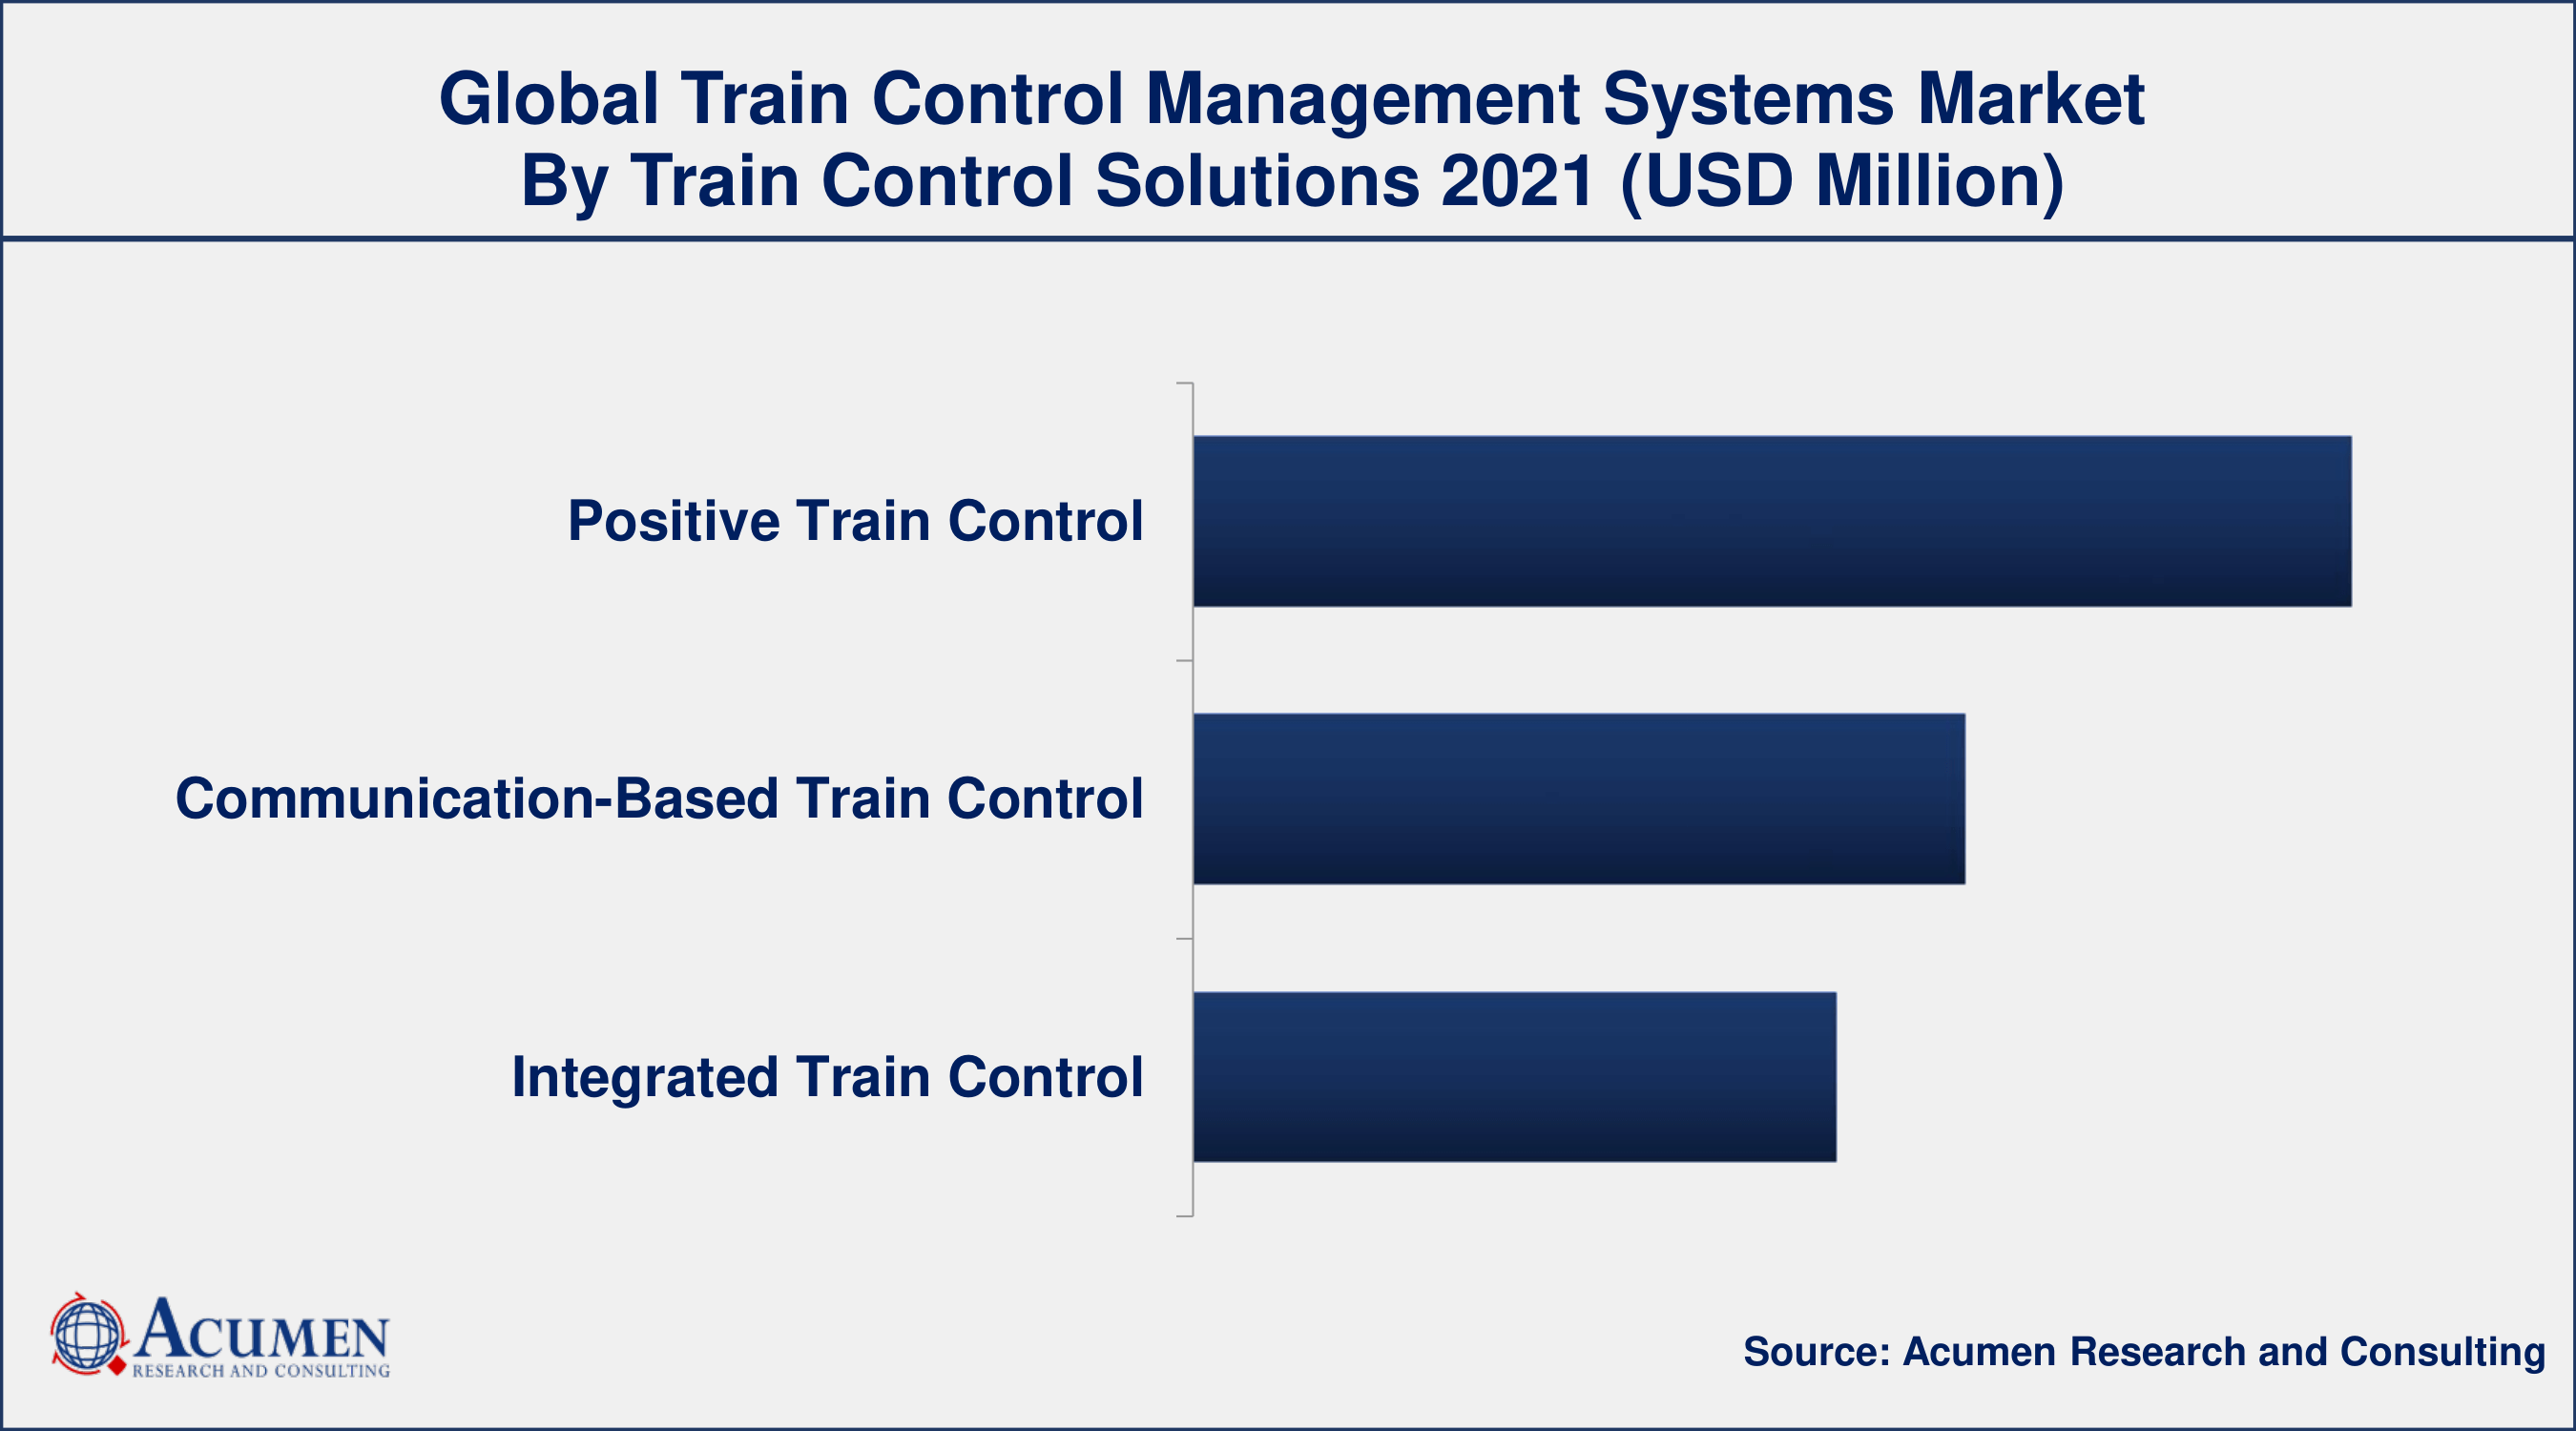 Increasing government budget for rail transportation, drives the train control management systems market share